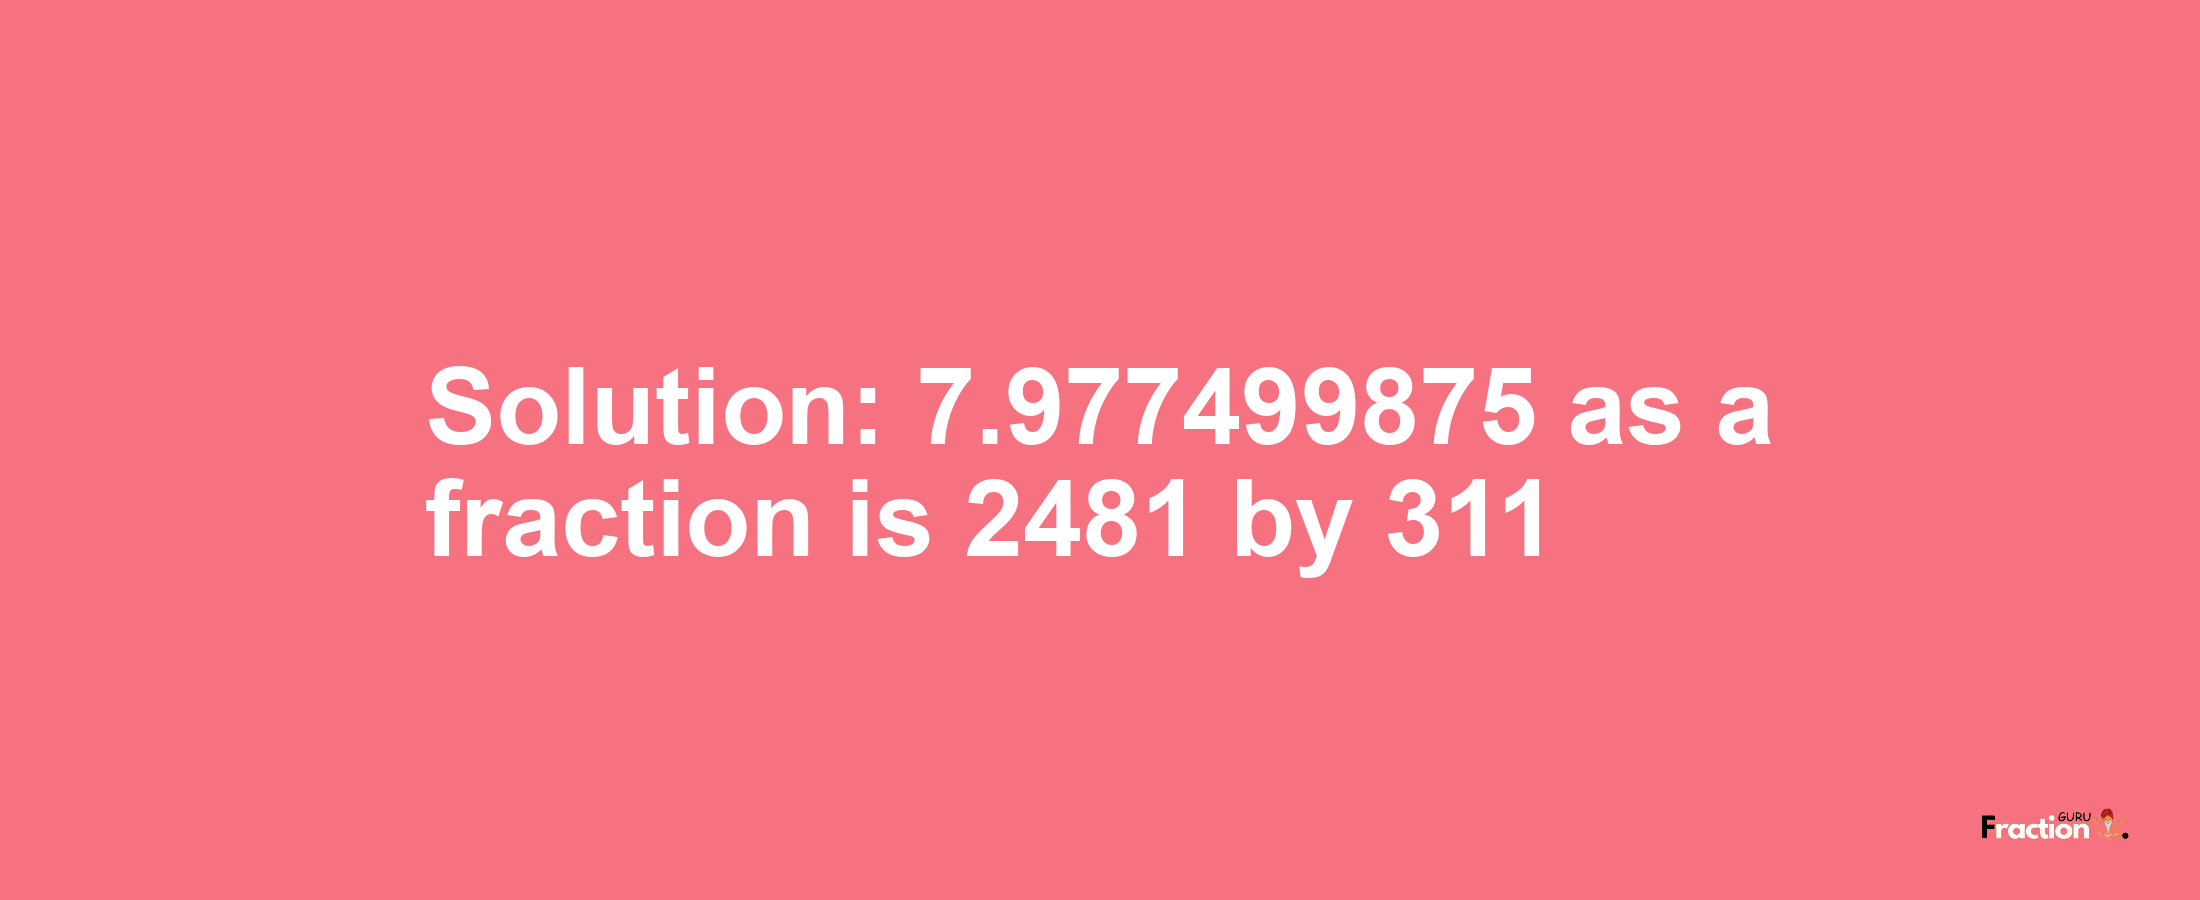 Solution:7.977499875 as a fraction is 2481/311